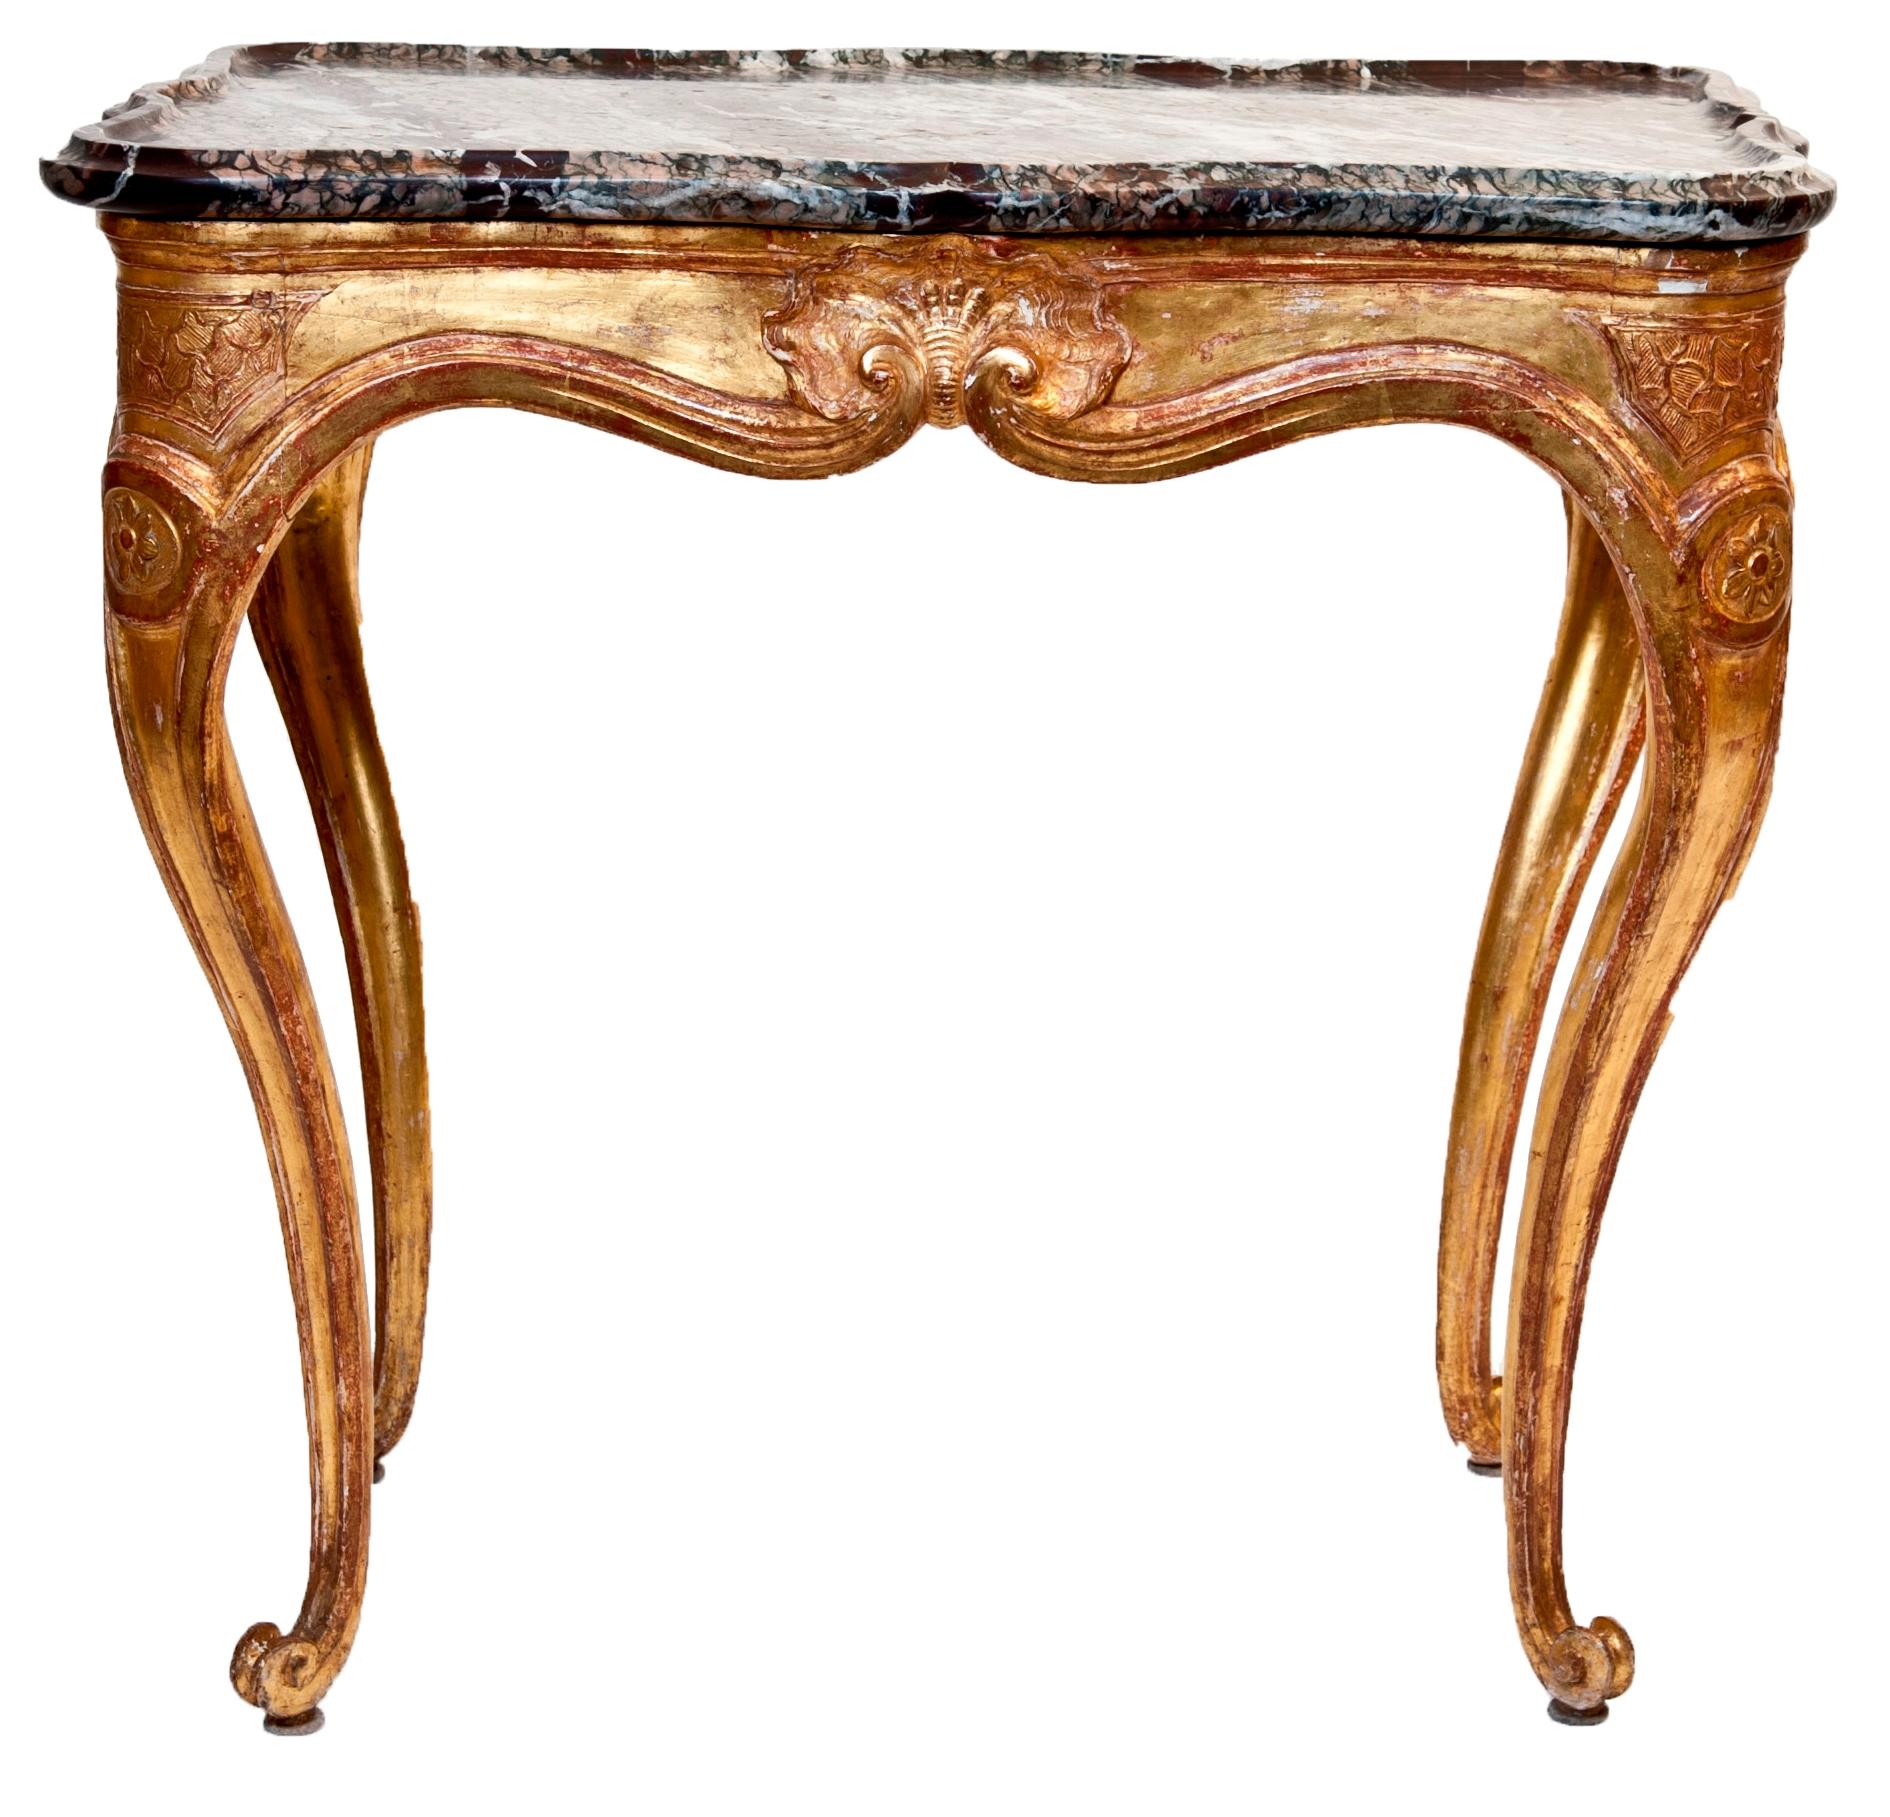 French 18th Century Louis XV Gilt Gesso Centre Table